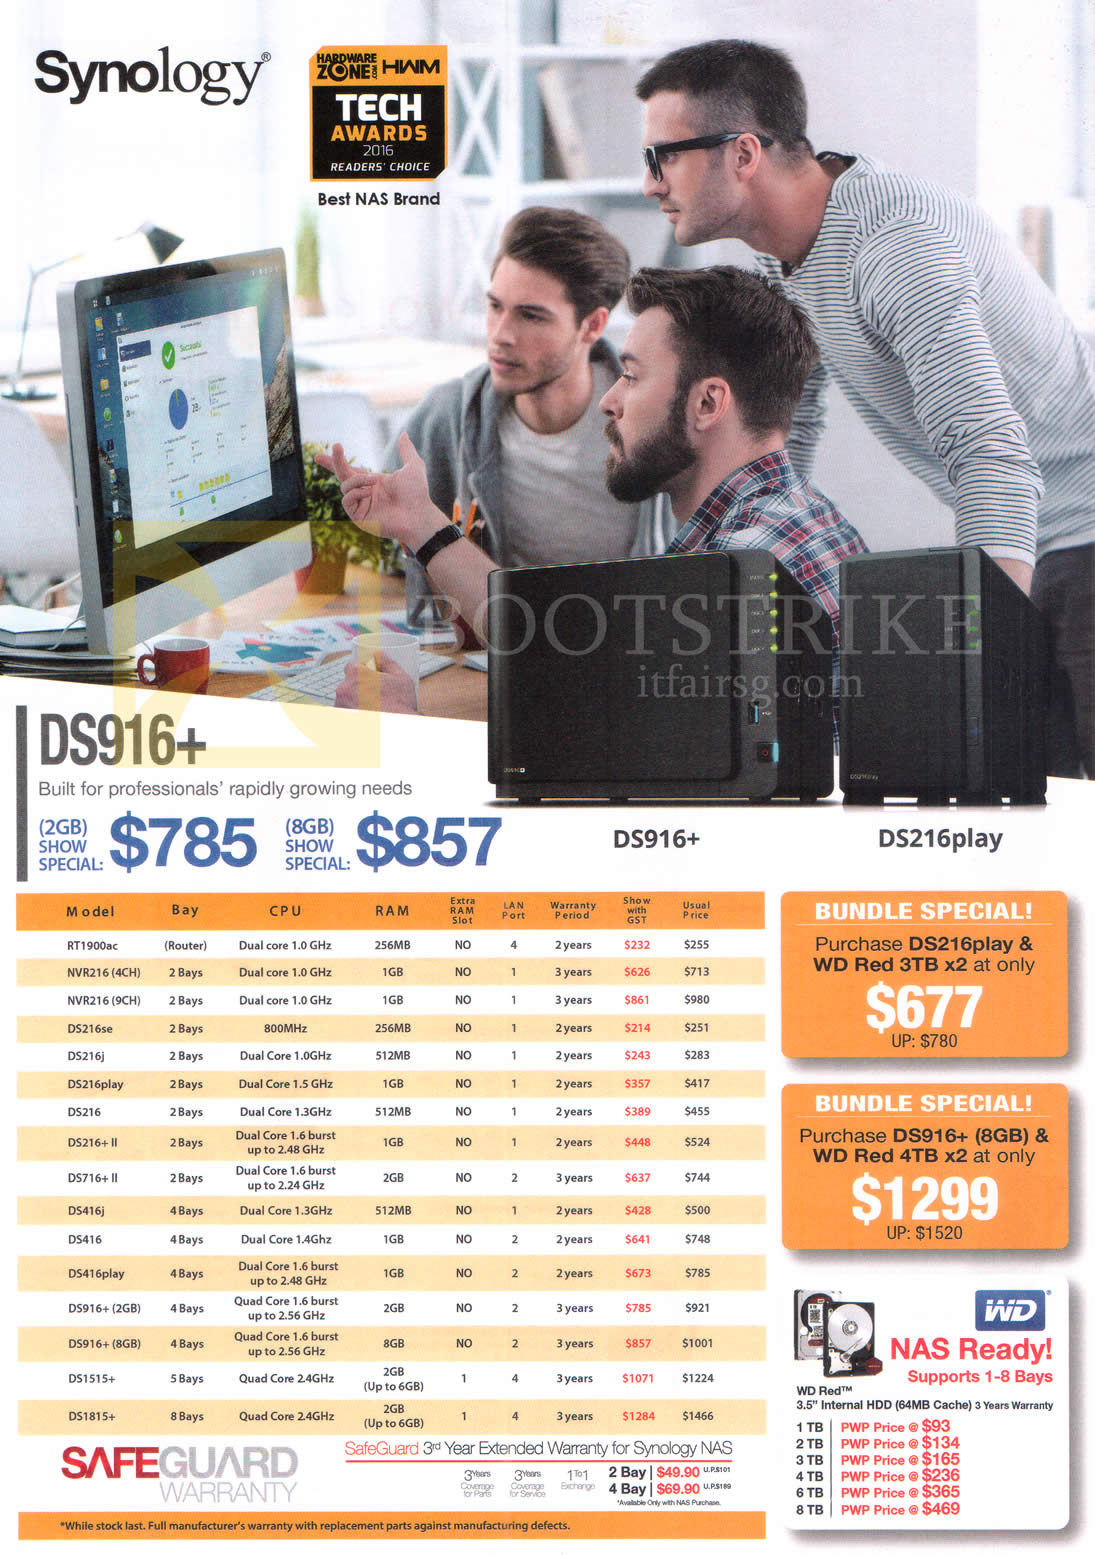 COMEX 2016 price list image brochure of Unknown Synology NAS DS916Plus, 216j, 216play, 216Plus II, 416j, 416, 416play, 1515plus, NVR216